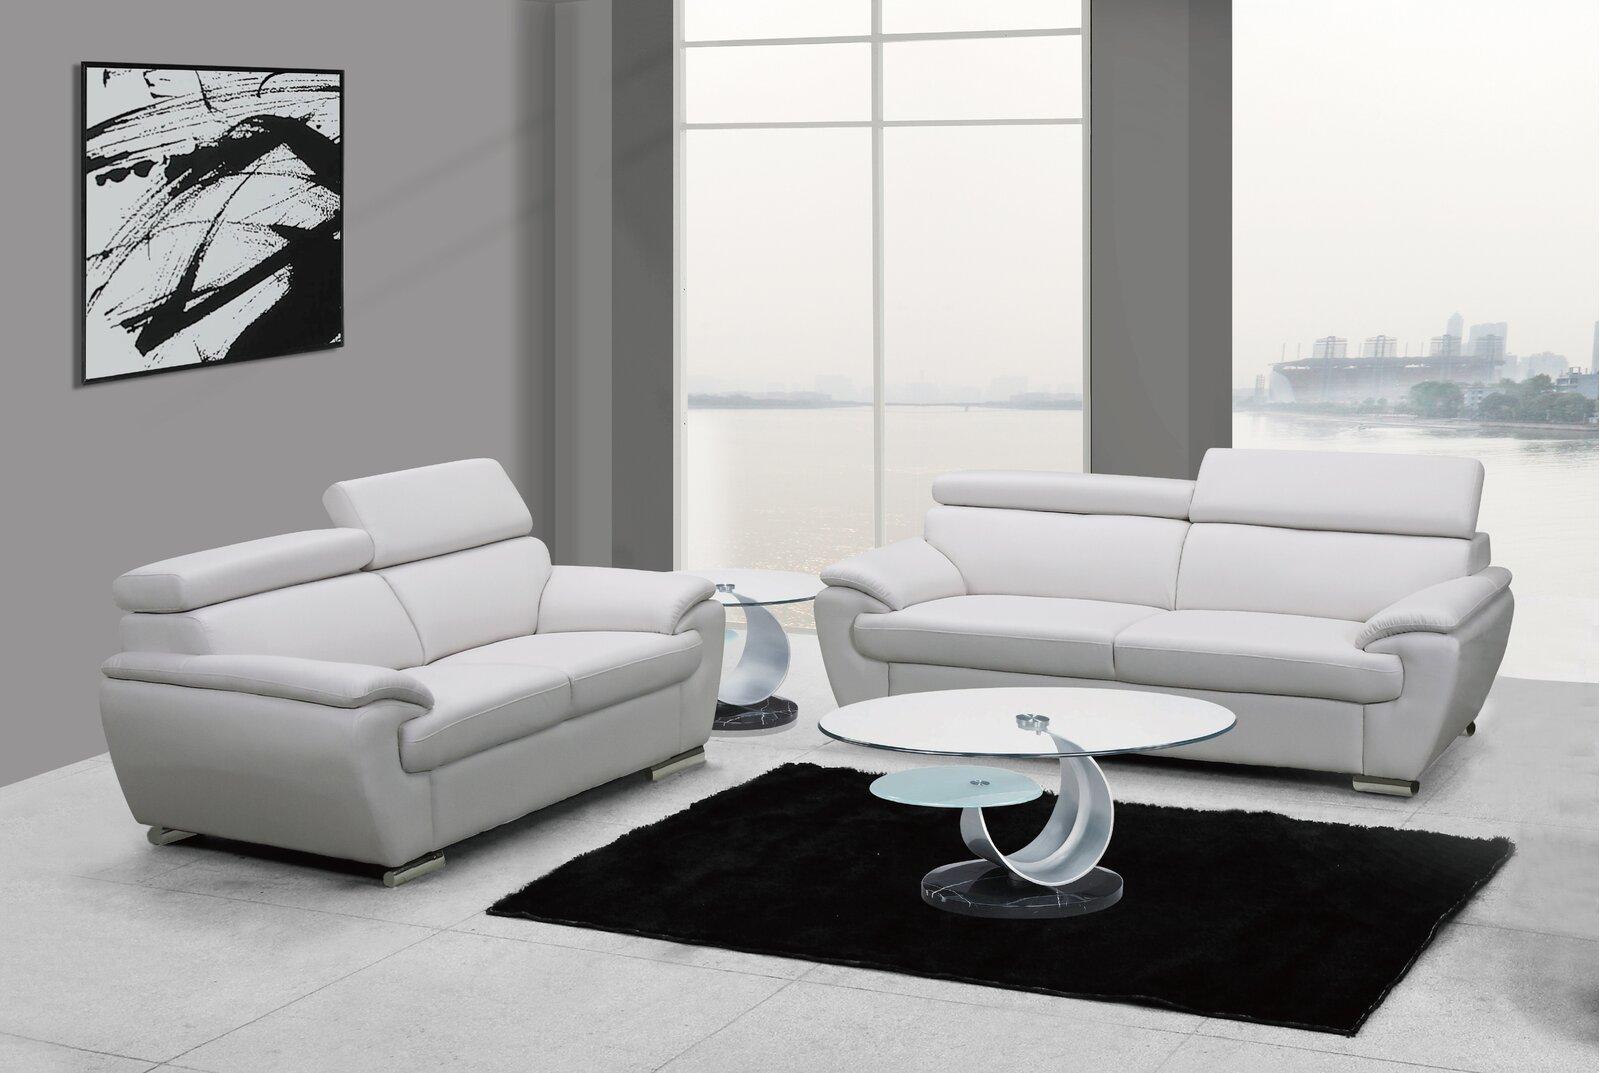 Contemporary Sofa and Loveseat Set Teagan SKU: HTBO1007 in White Leather Match